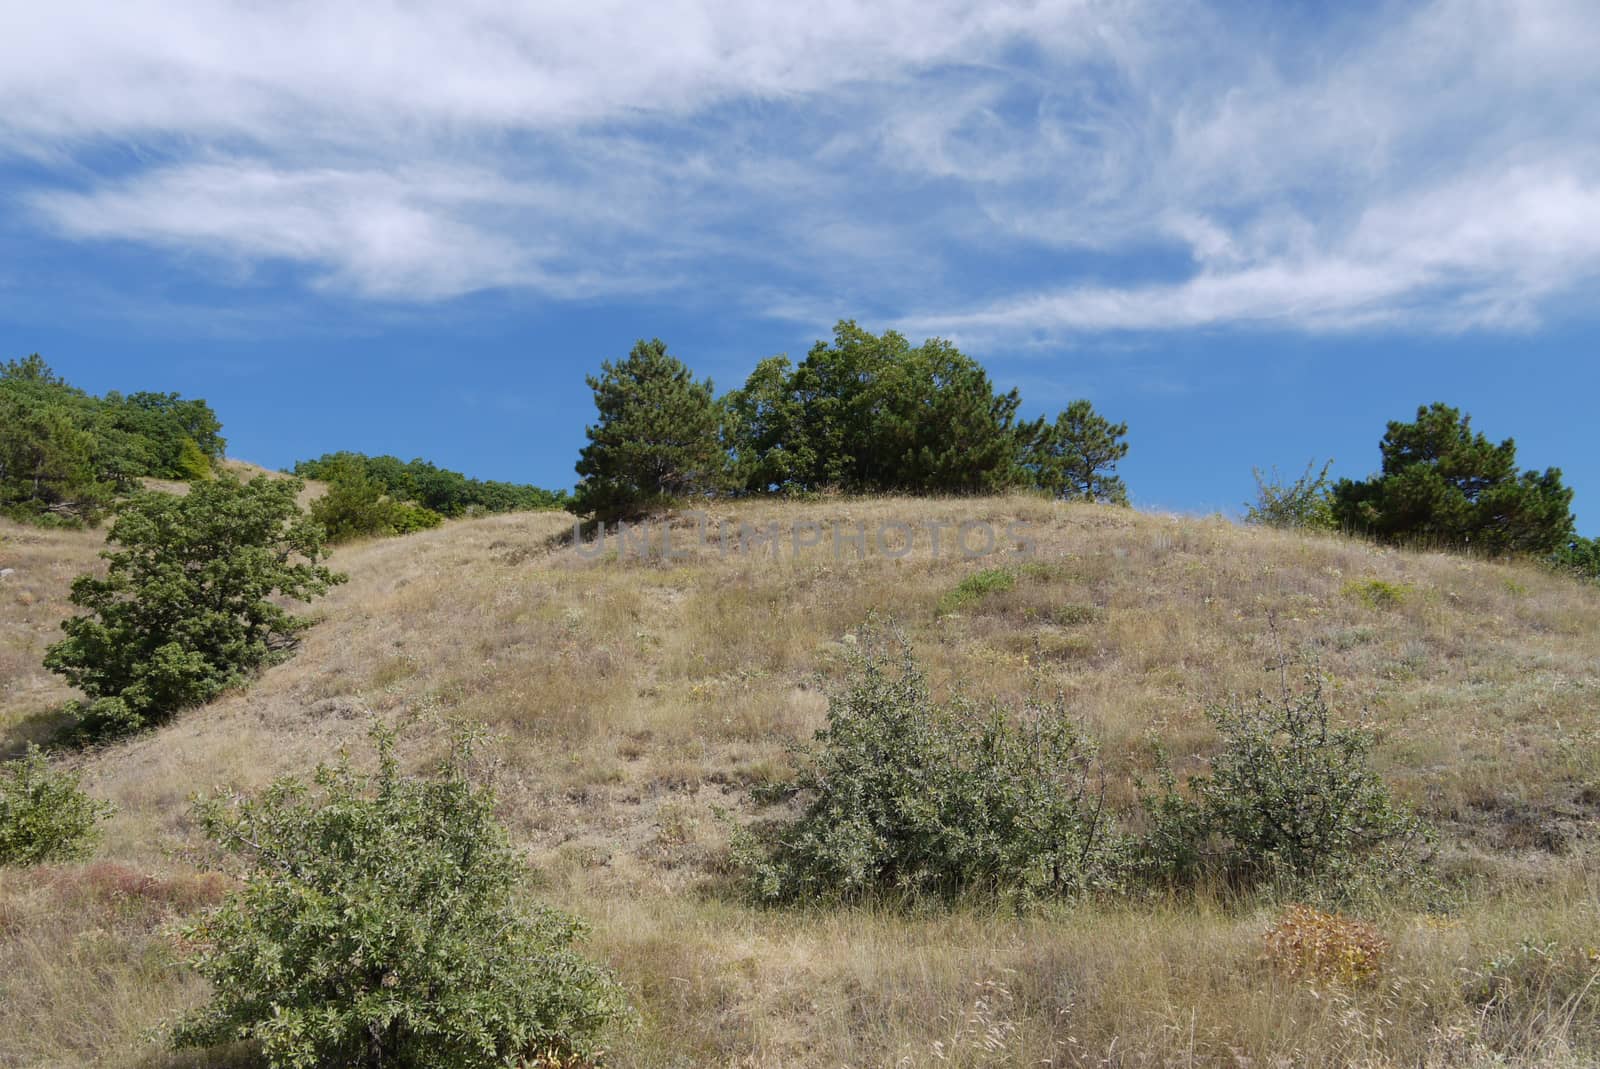 Landscape of a summer day with a low hill with burnt grass and rare green bushes against the background of a blue sky covered with a transparent veil of clouds. by Adamchuk